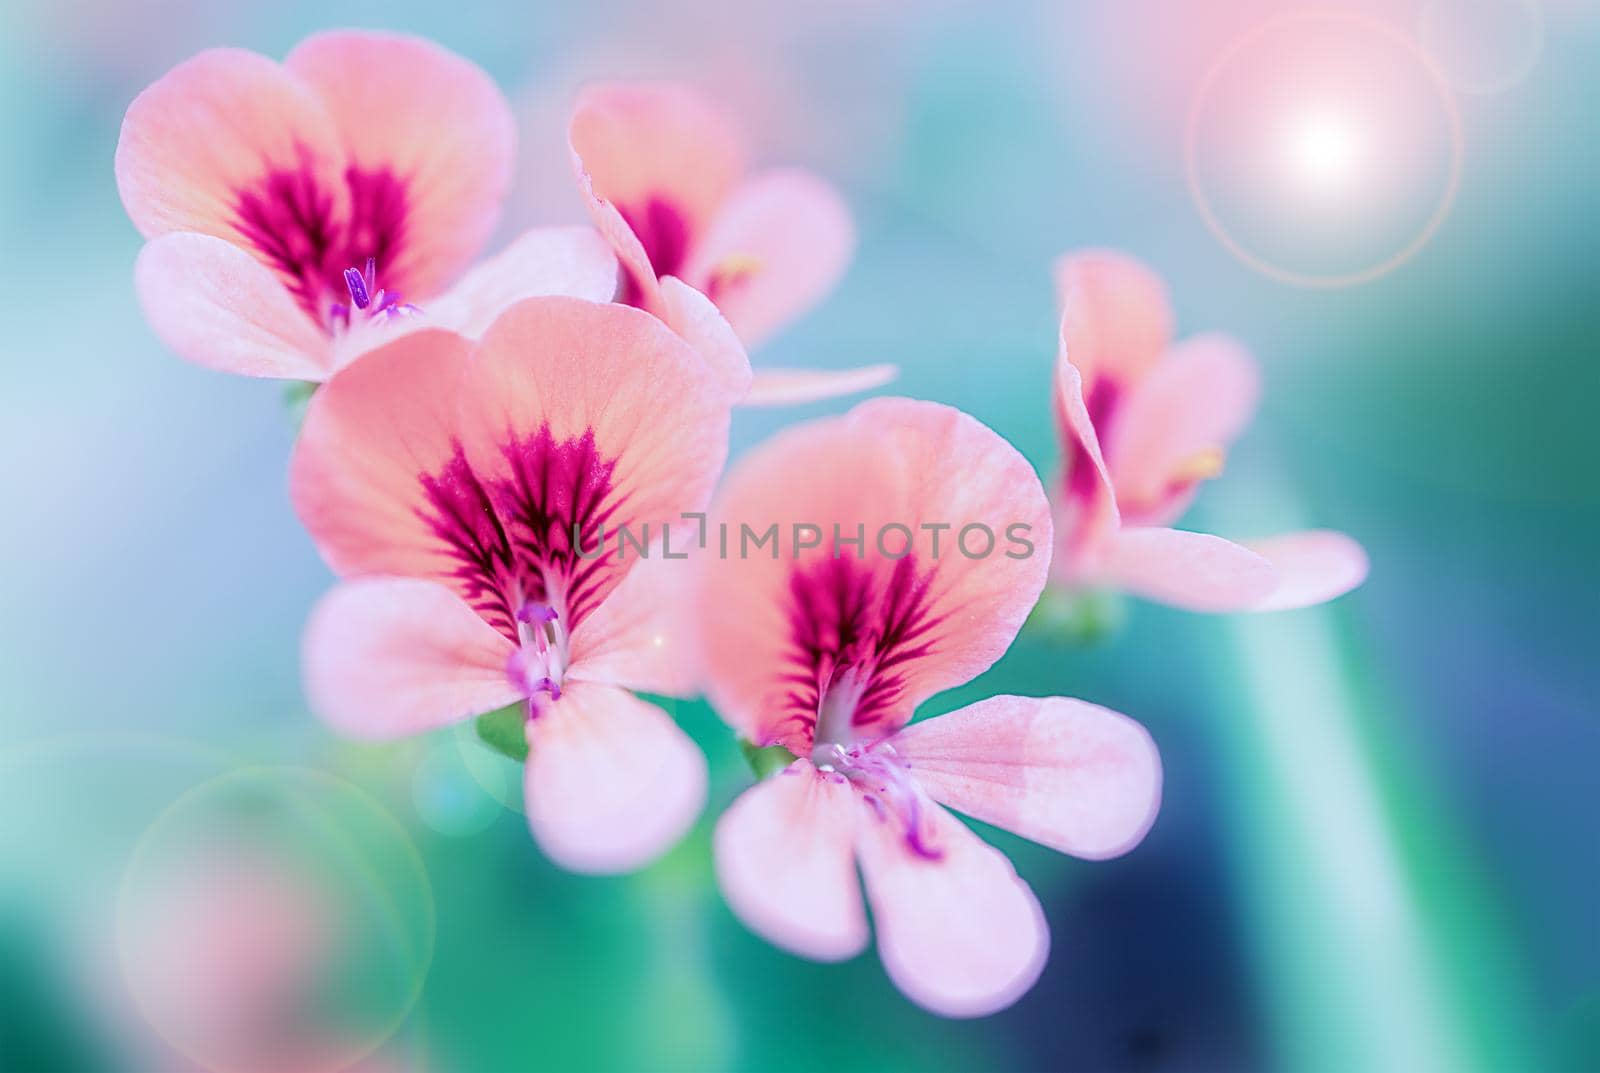 beautiful pink flowers on a blue blurred background, romantic card, poster by Ramanouskaya